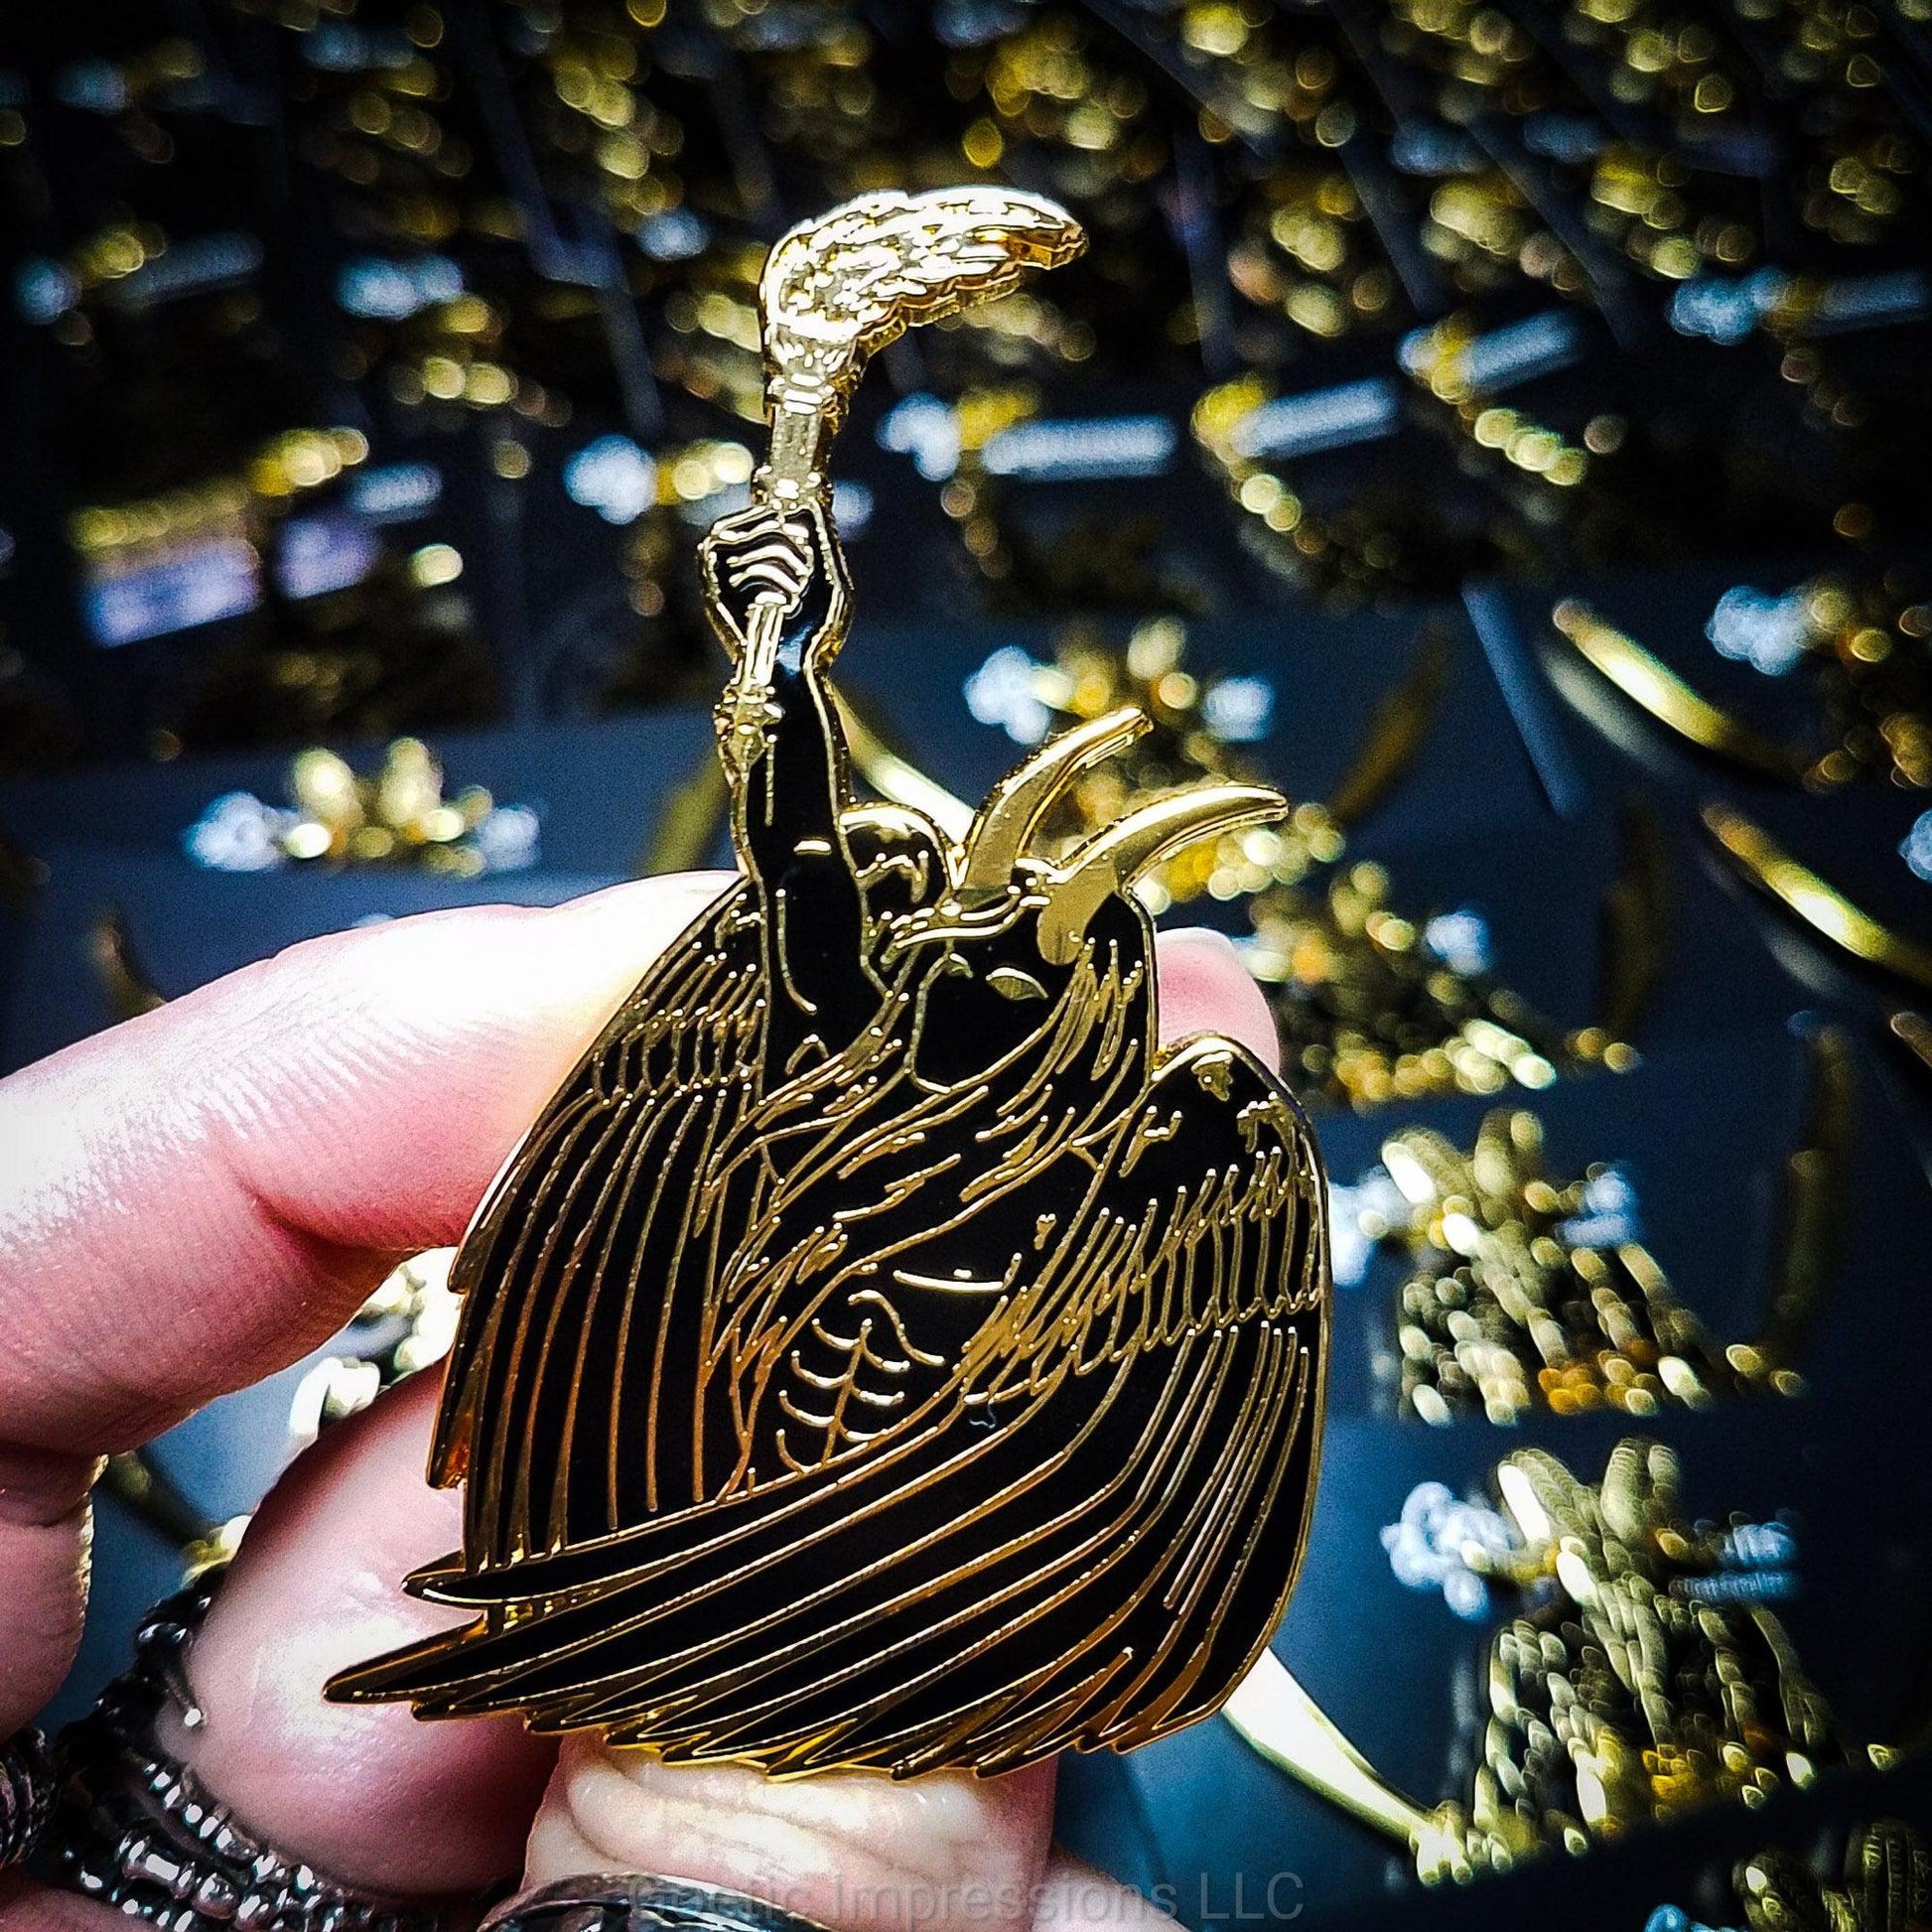 A ringed hand is holding a black and gold hard enamel pin of Lucifer. Lucifer is holding a flaming torch held high and has his wings surrounding him. He has horns and is bare chested.